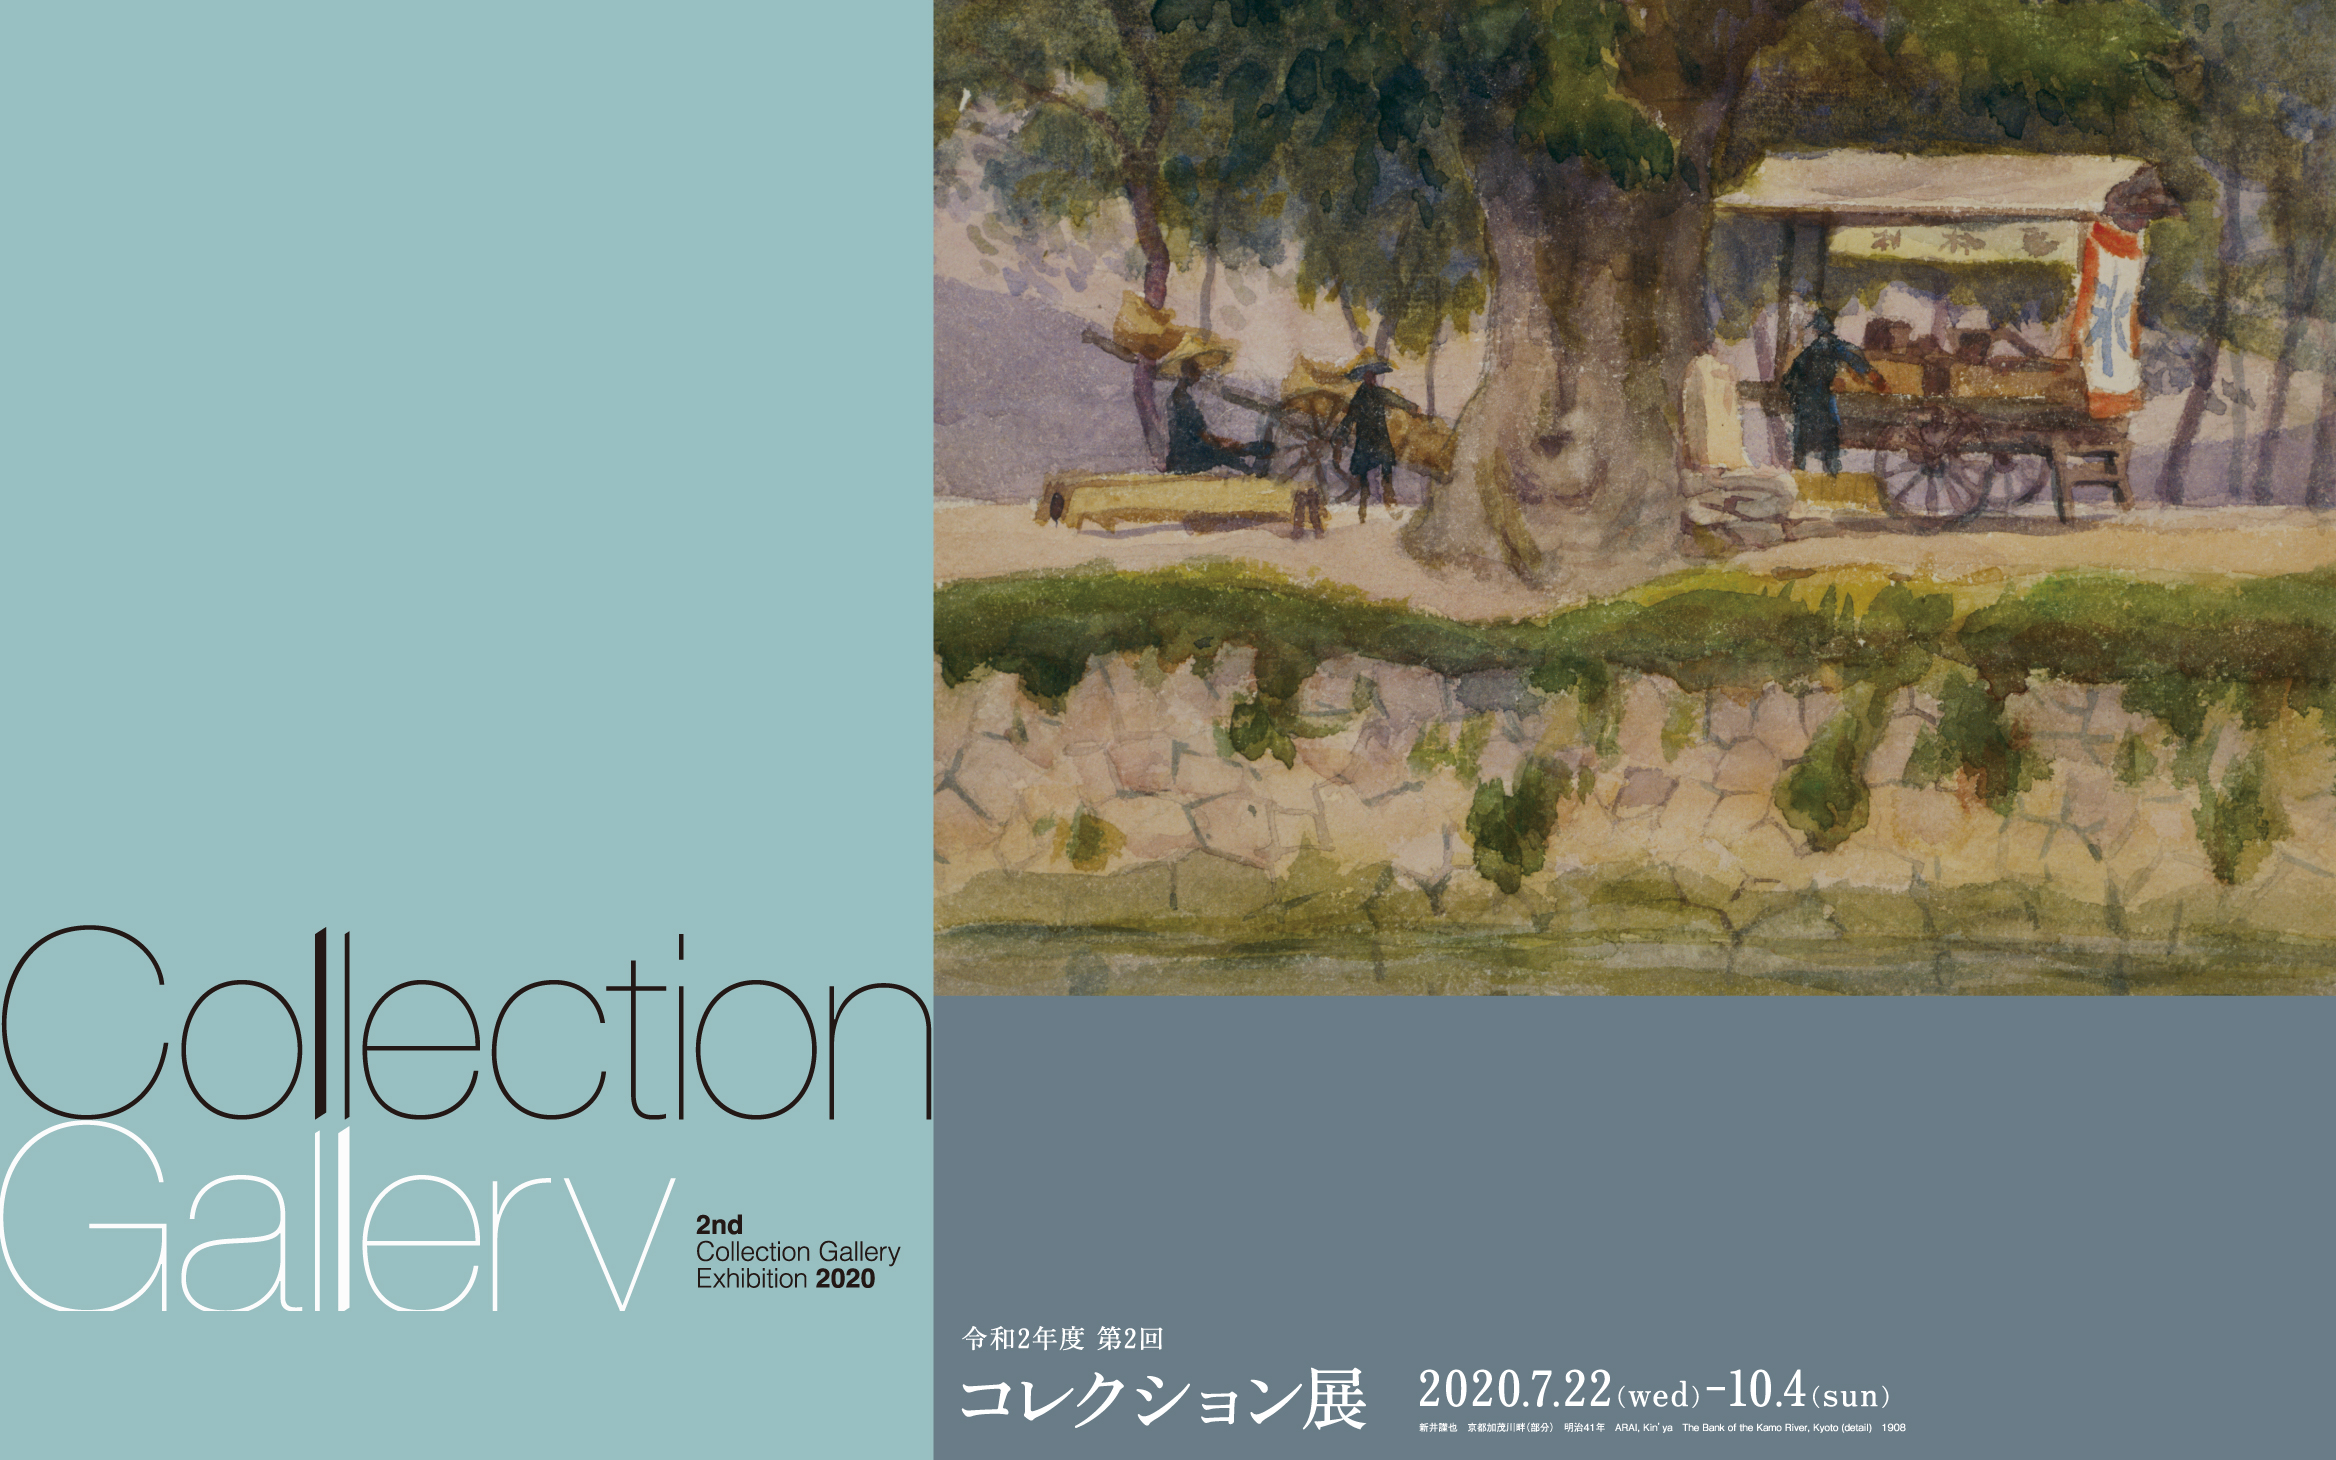 2nd Collection Gallery Exhibition 2020–2021